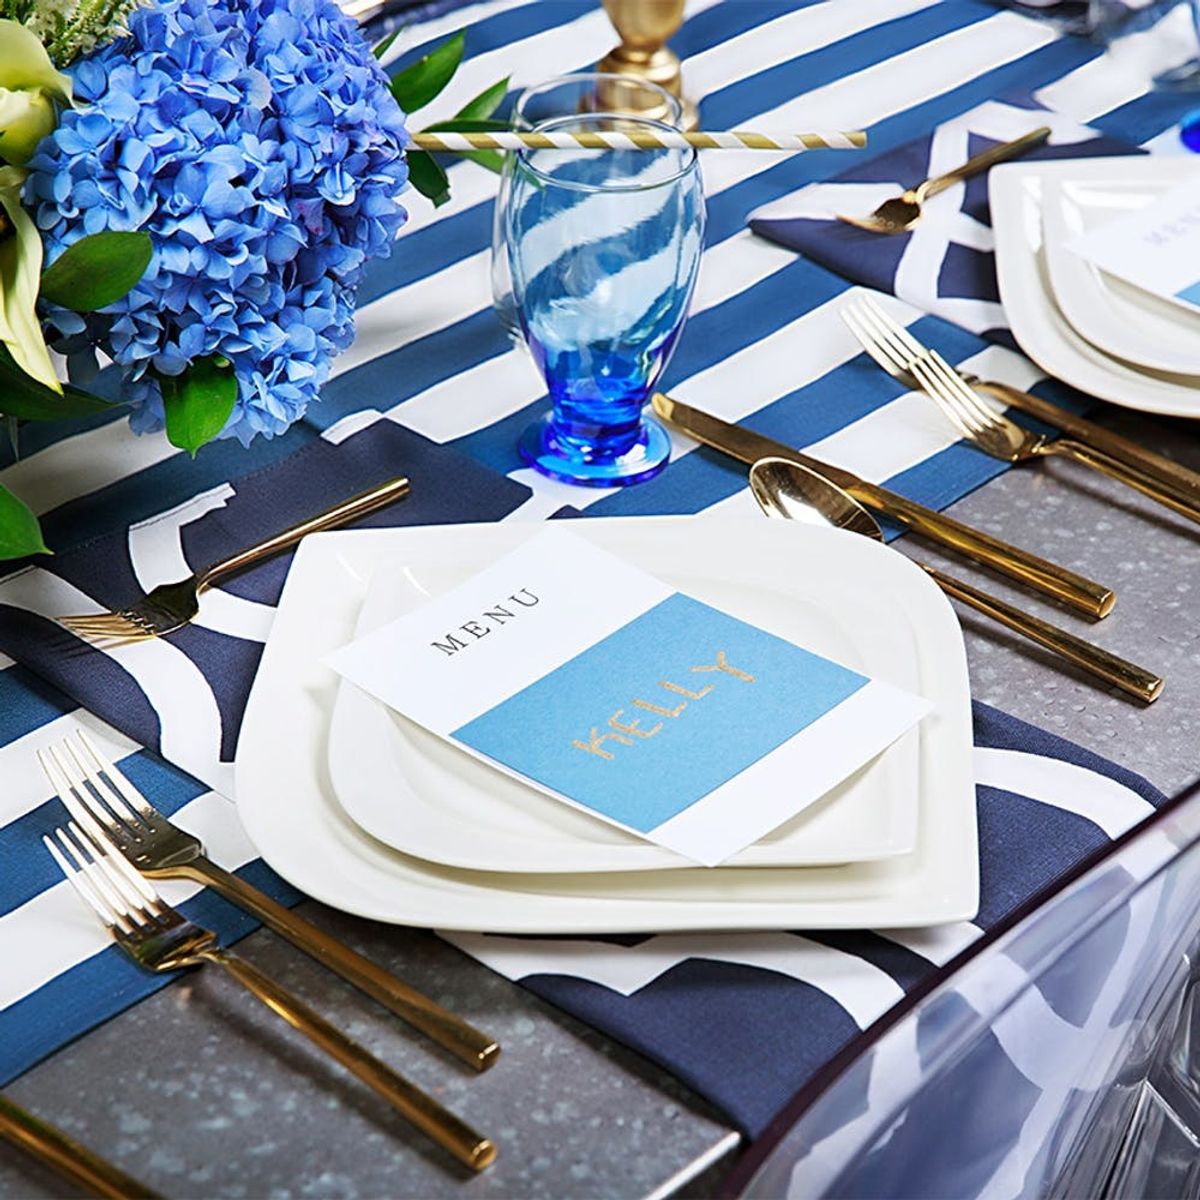 This SF Company Lets You Rent Picture-Perfect Table Settings For Your Next Dinner Party